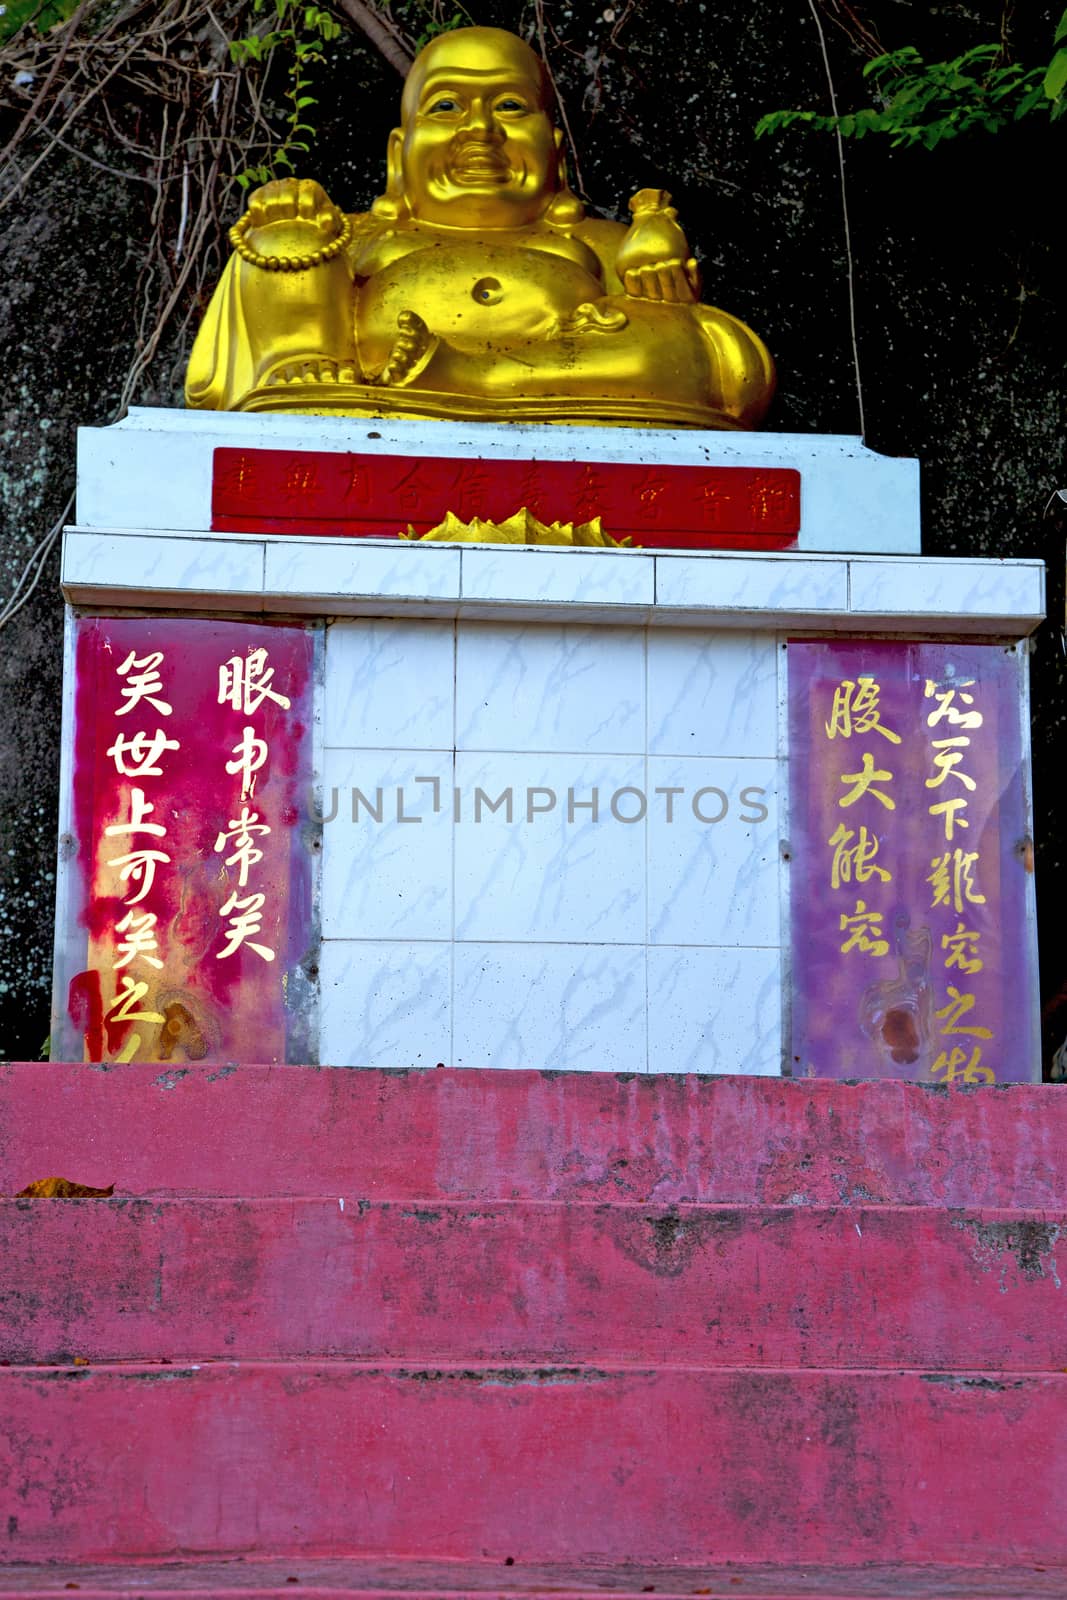 siddharta   in the temple     thailand abstract cross       pala by lkpro